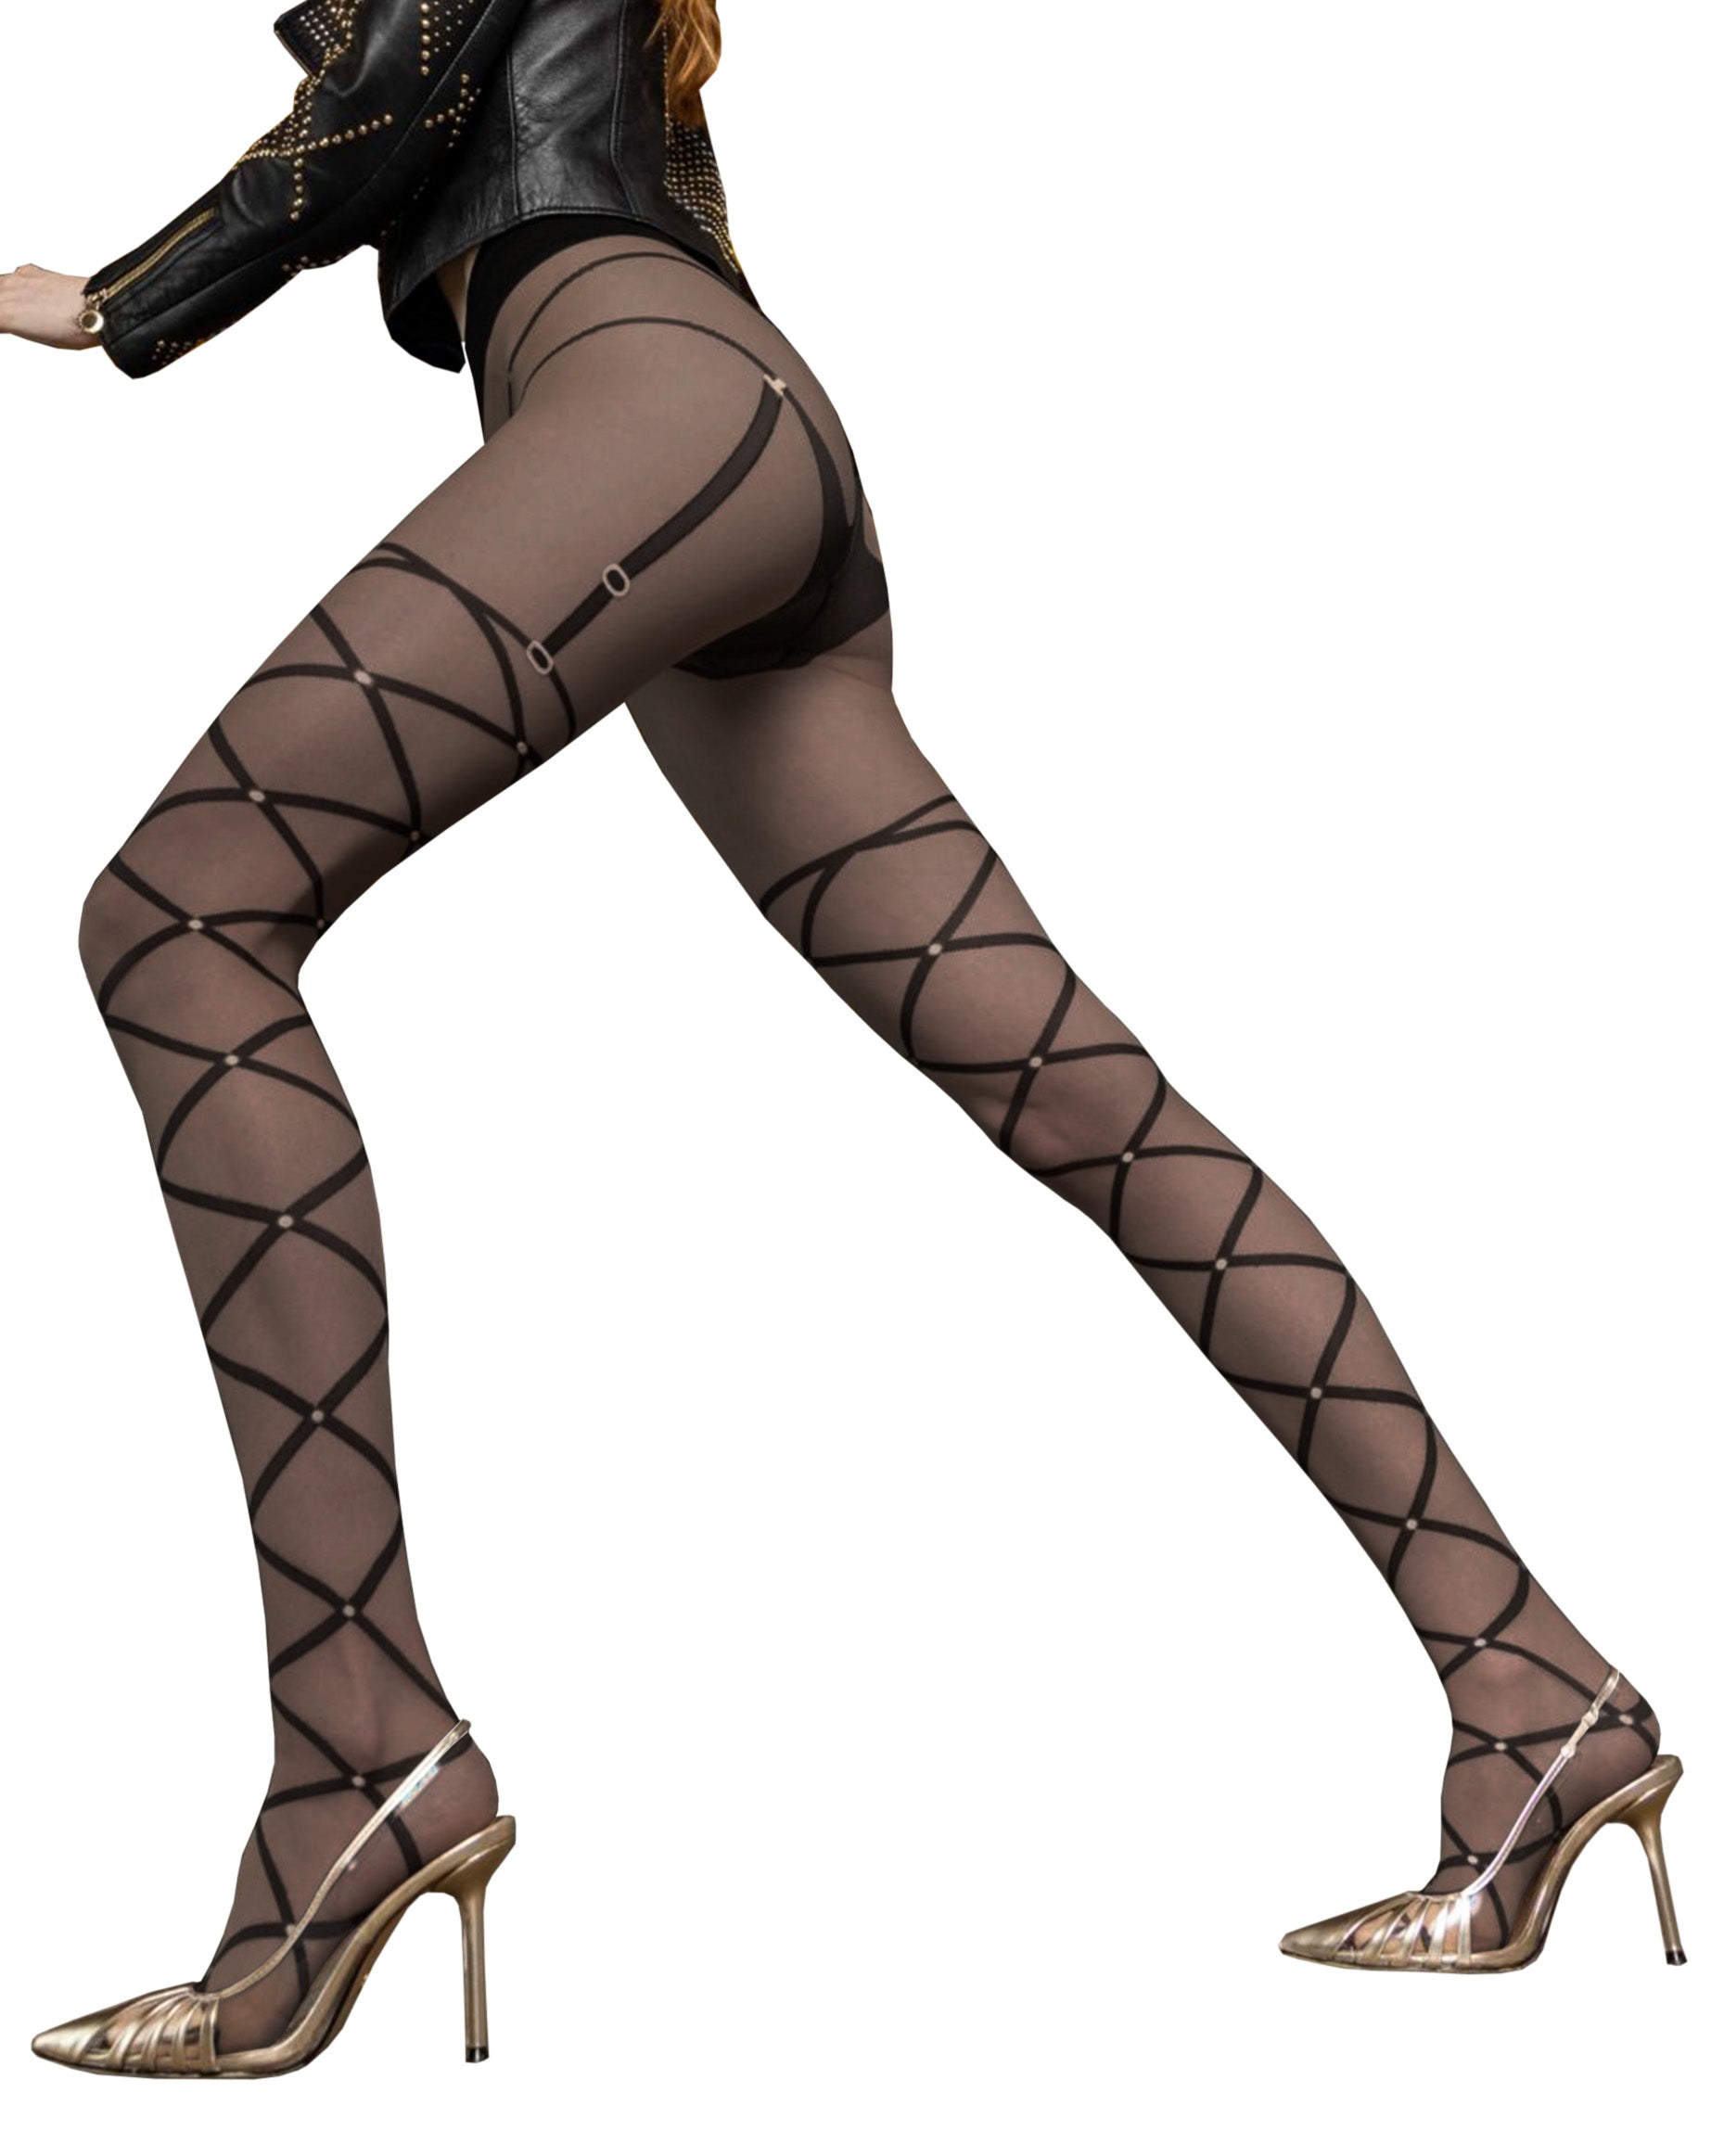 Trasparenze Toronto Collant - Sheer black fashion tights with a black linear diamond pattern that look like leg wraps with faux suspender straps and brief with light grey details.